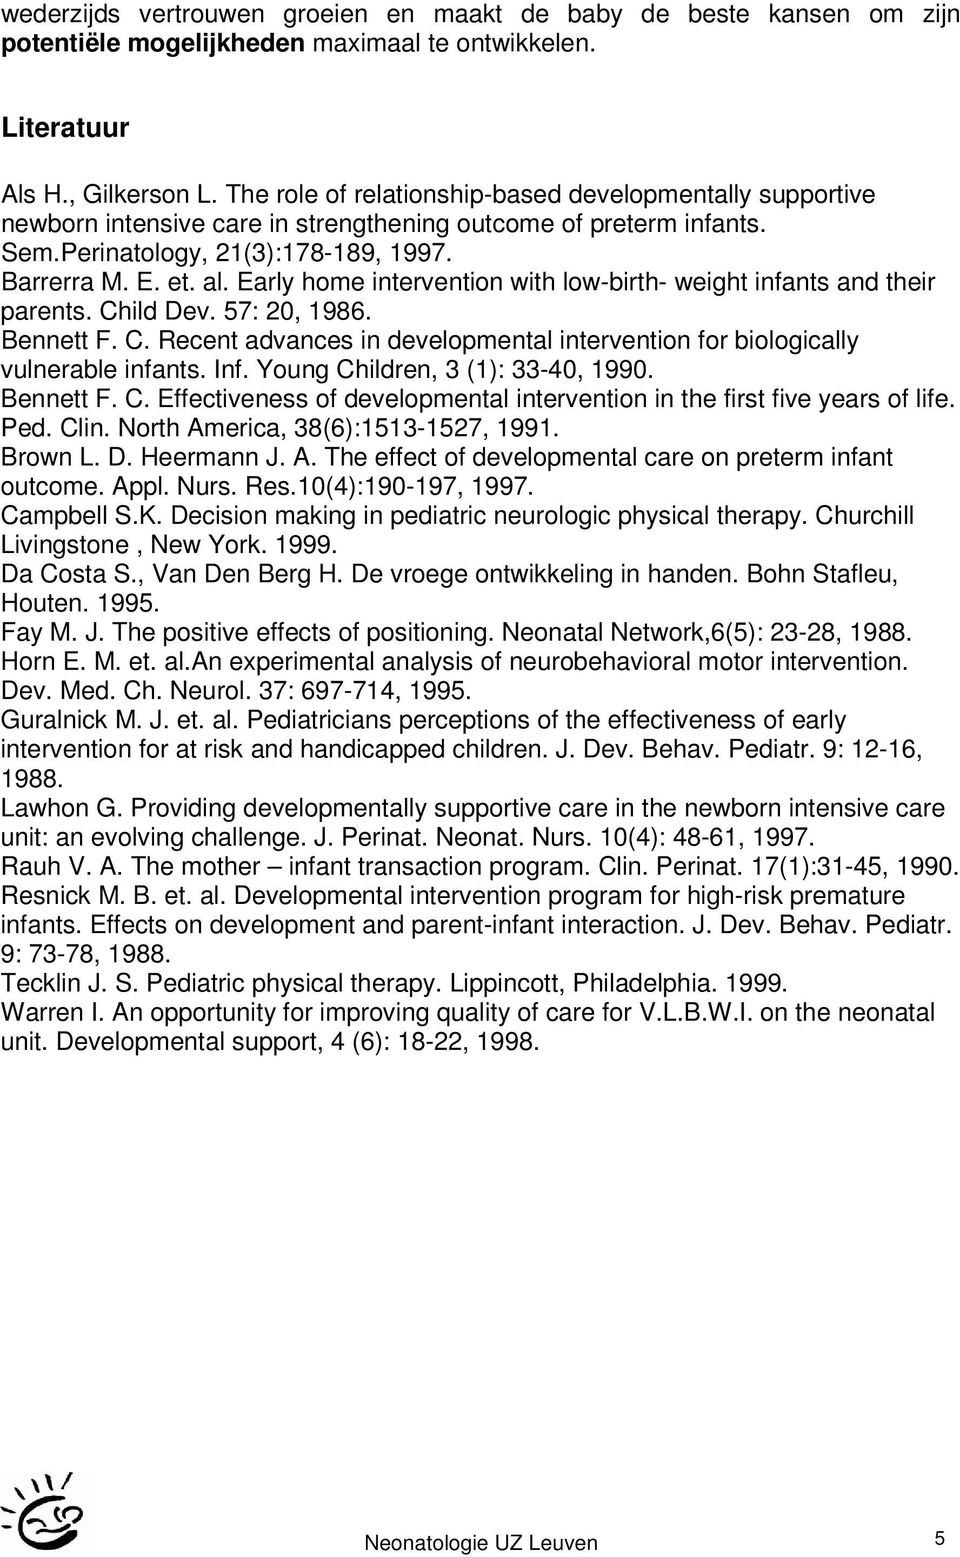 Early home intervention with low-birth- weight infants and their parents. Child Dev. 57: 20, 1986. Bennett F. C. Recent advances in developmental intervention for biologically vulnerable infants. Inf.